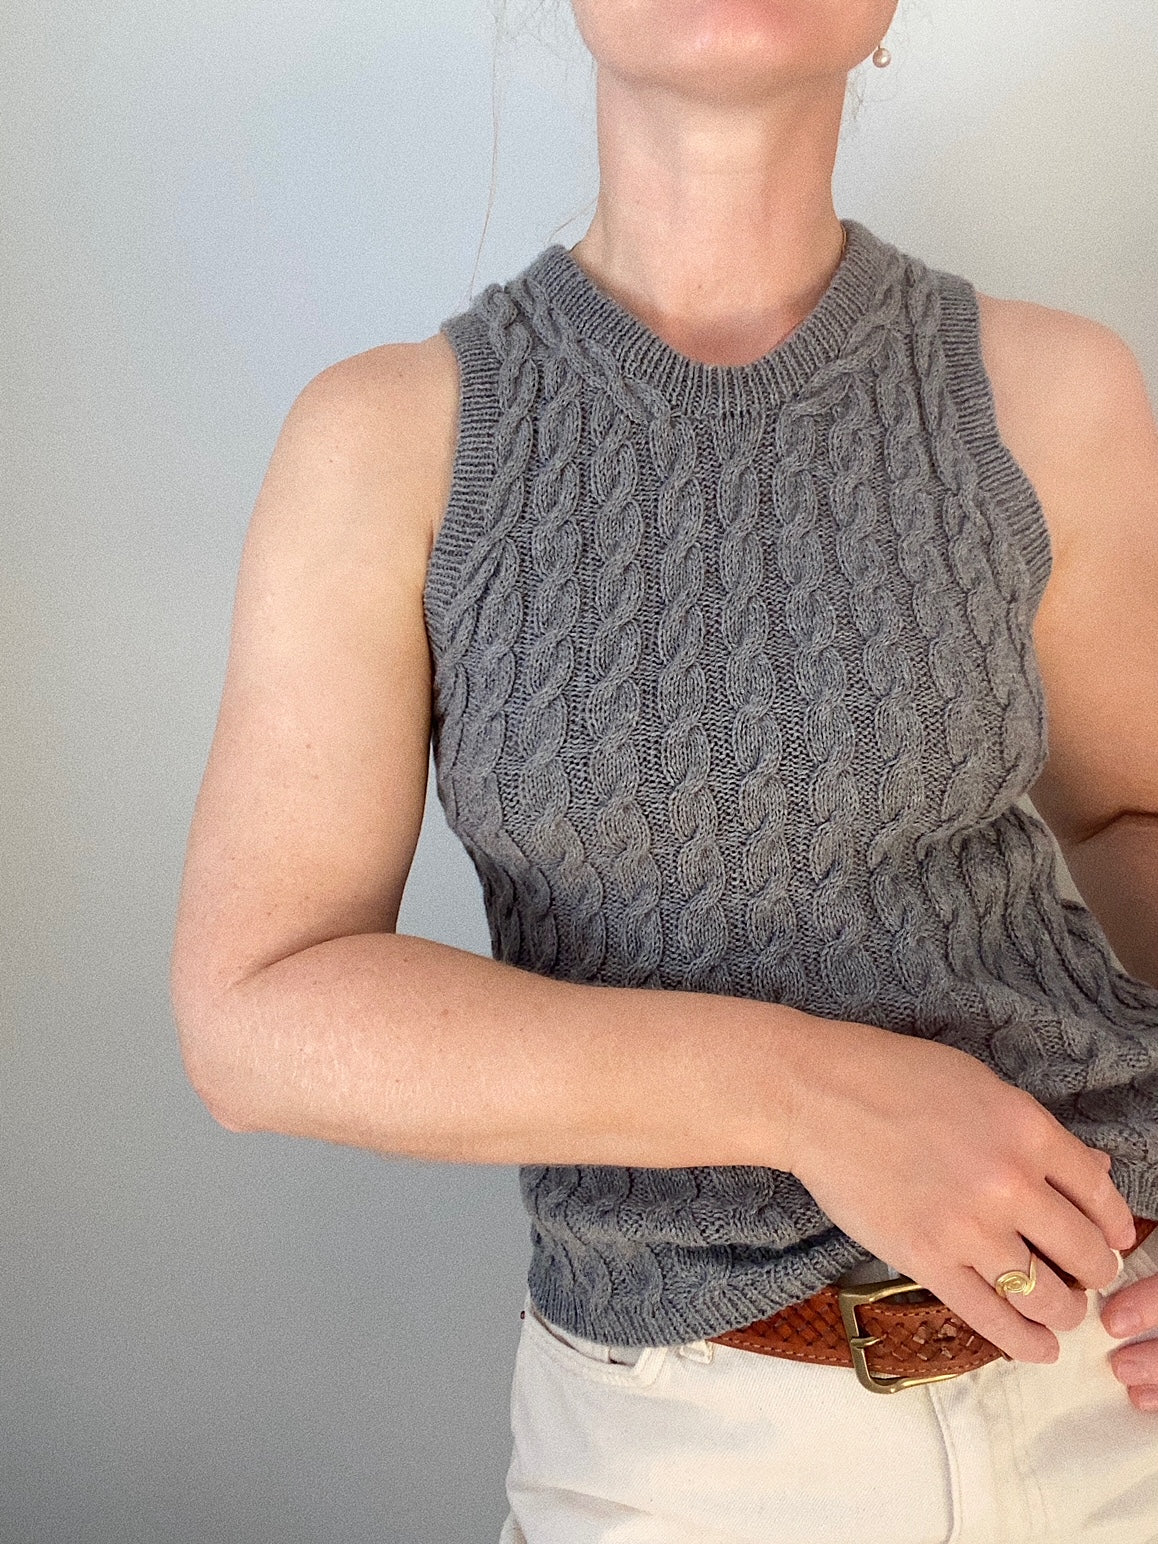 Camisole No. 8 My Favourite Things Knitwear  – Strickpaket